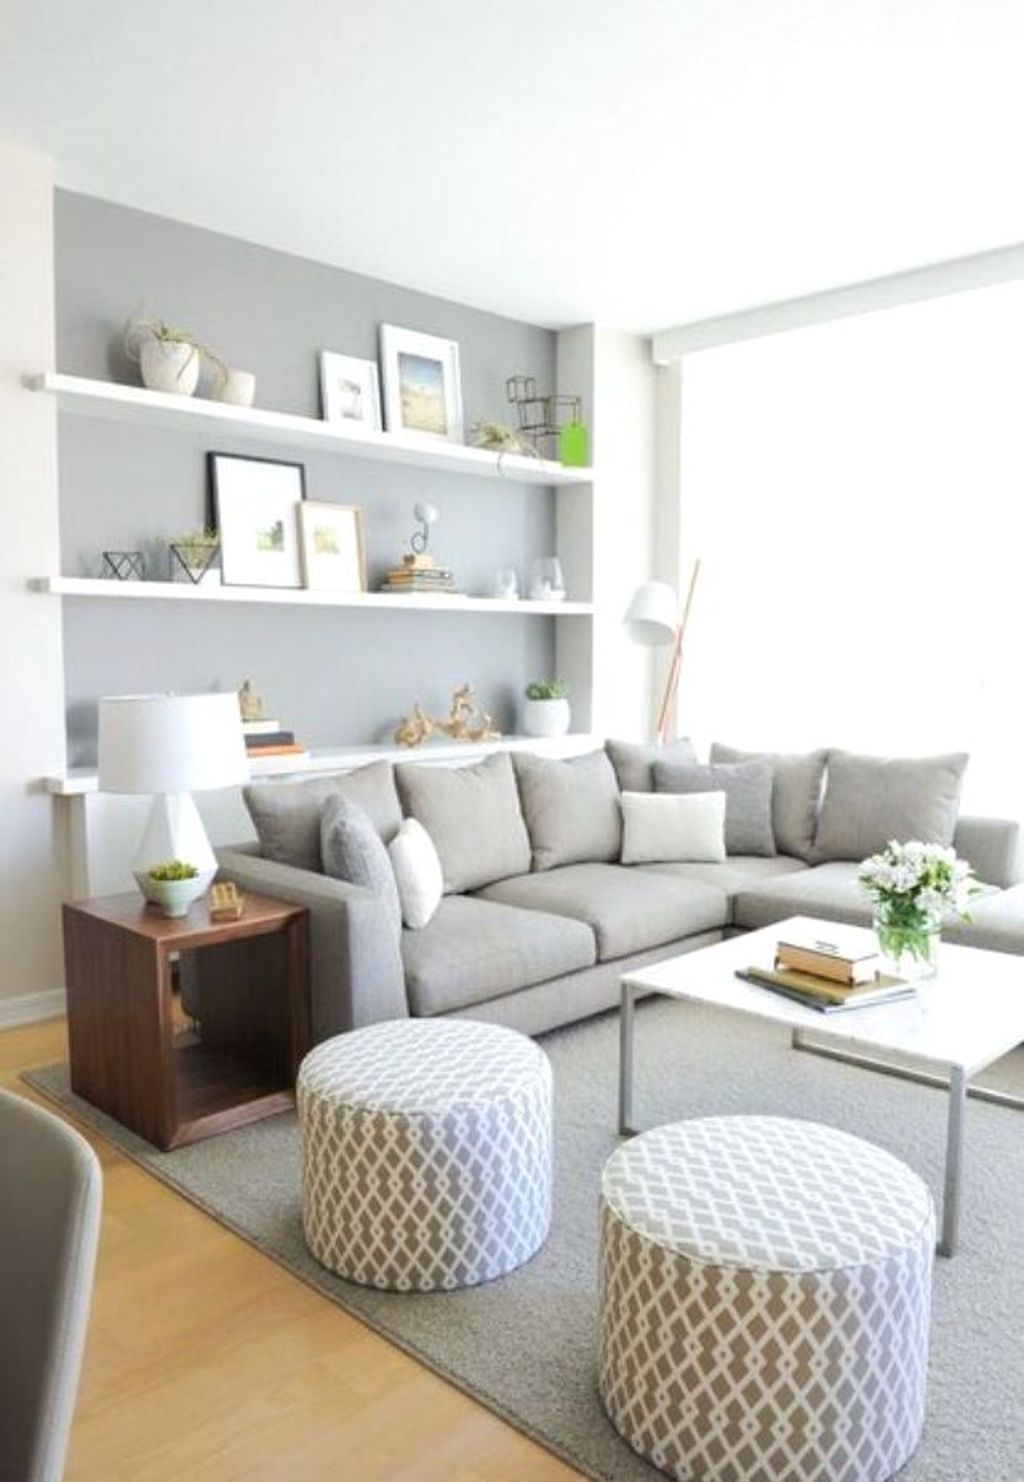 Popular Ways To Efficiently Arrange Furniture For Small Living Room 01